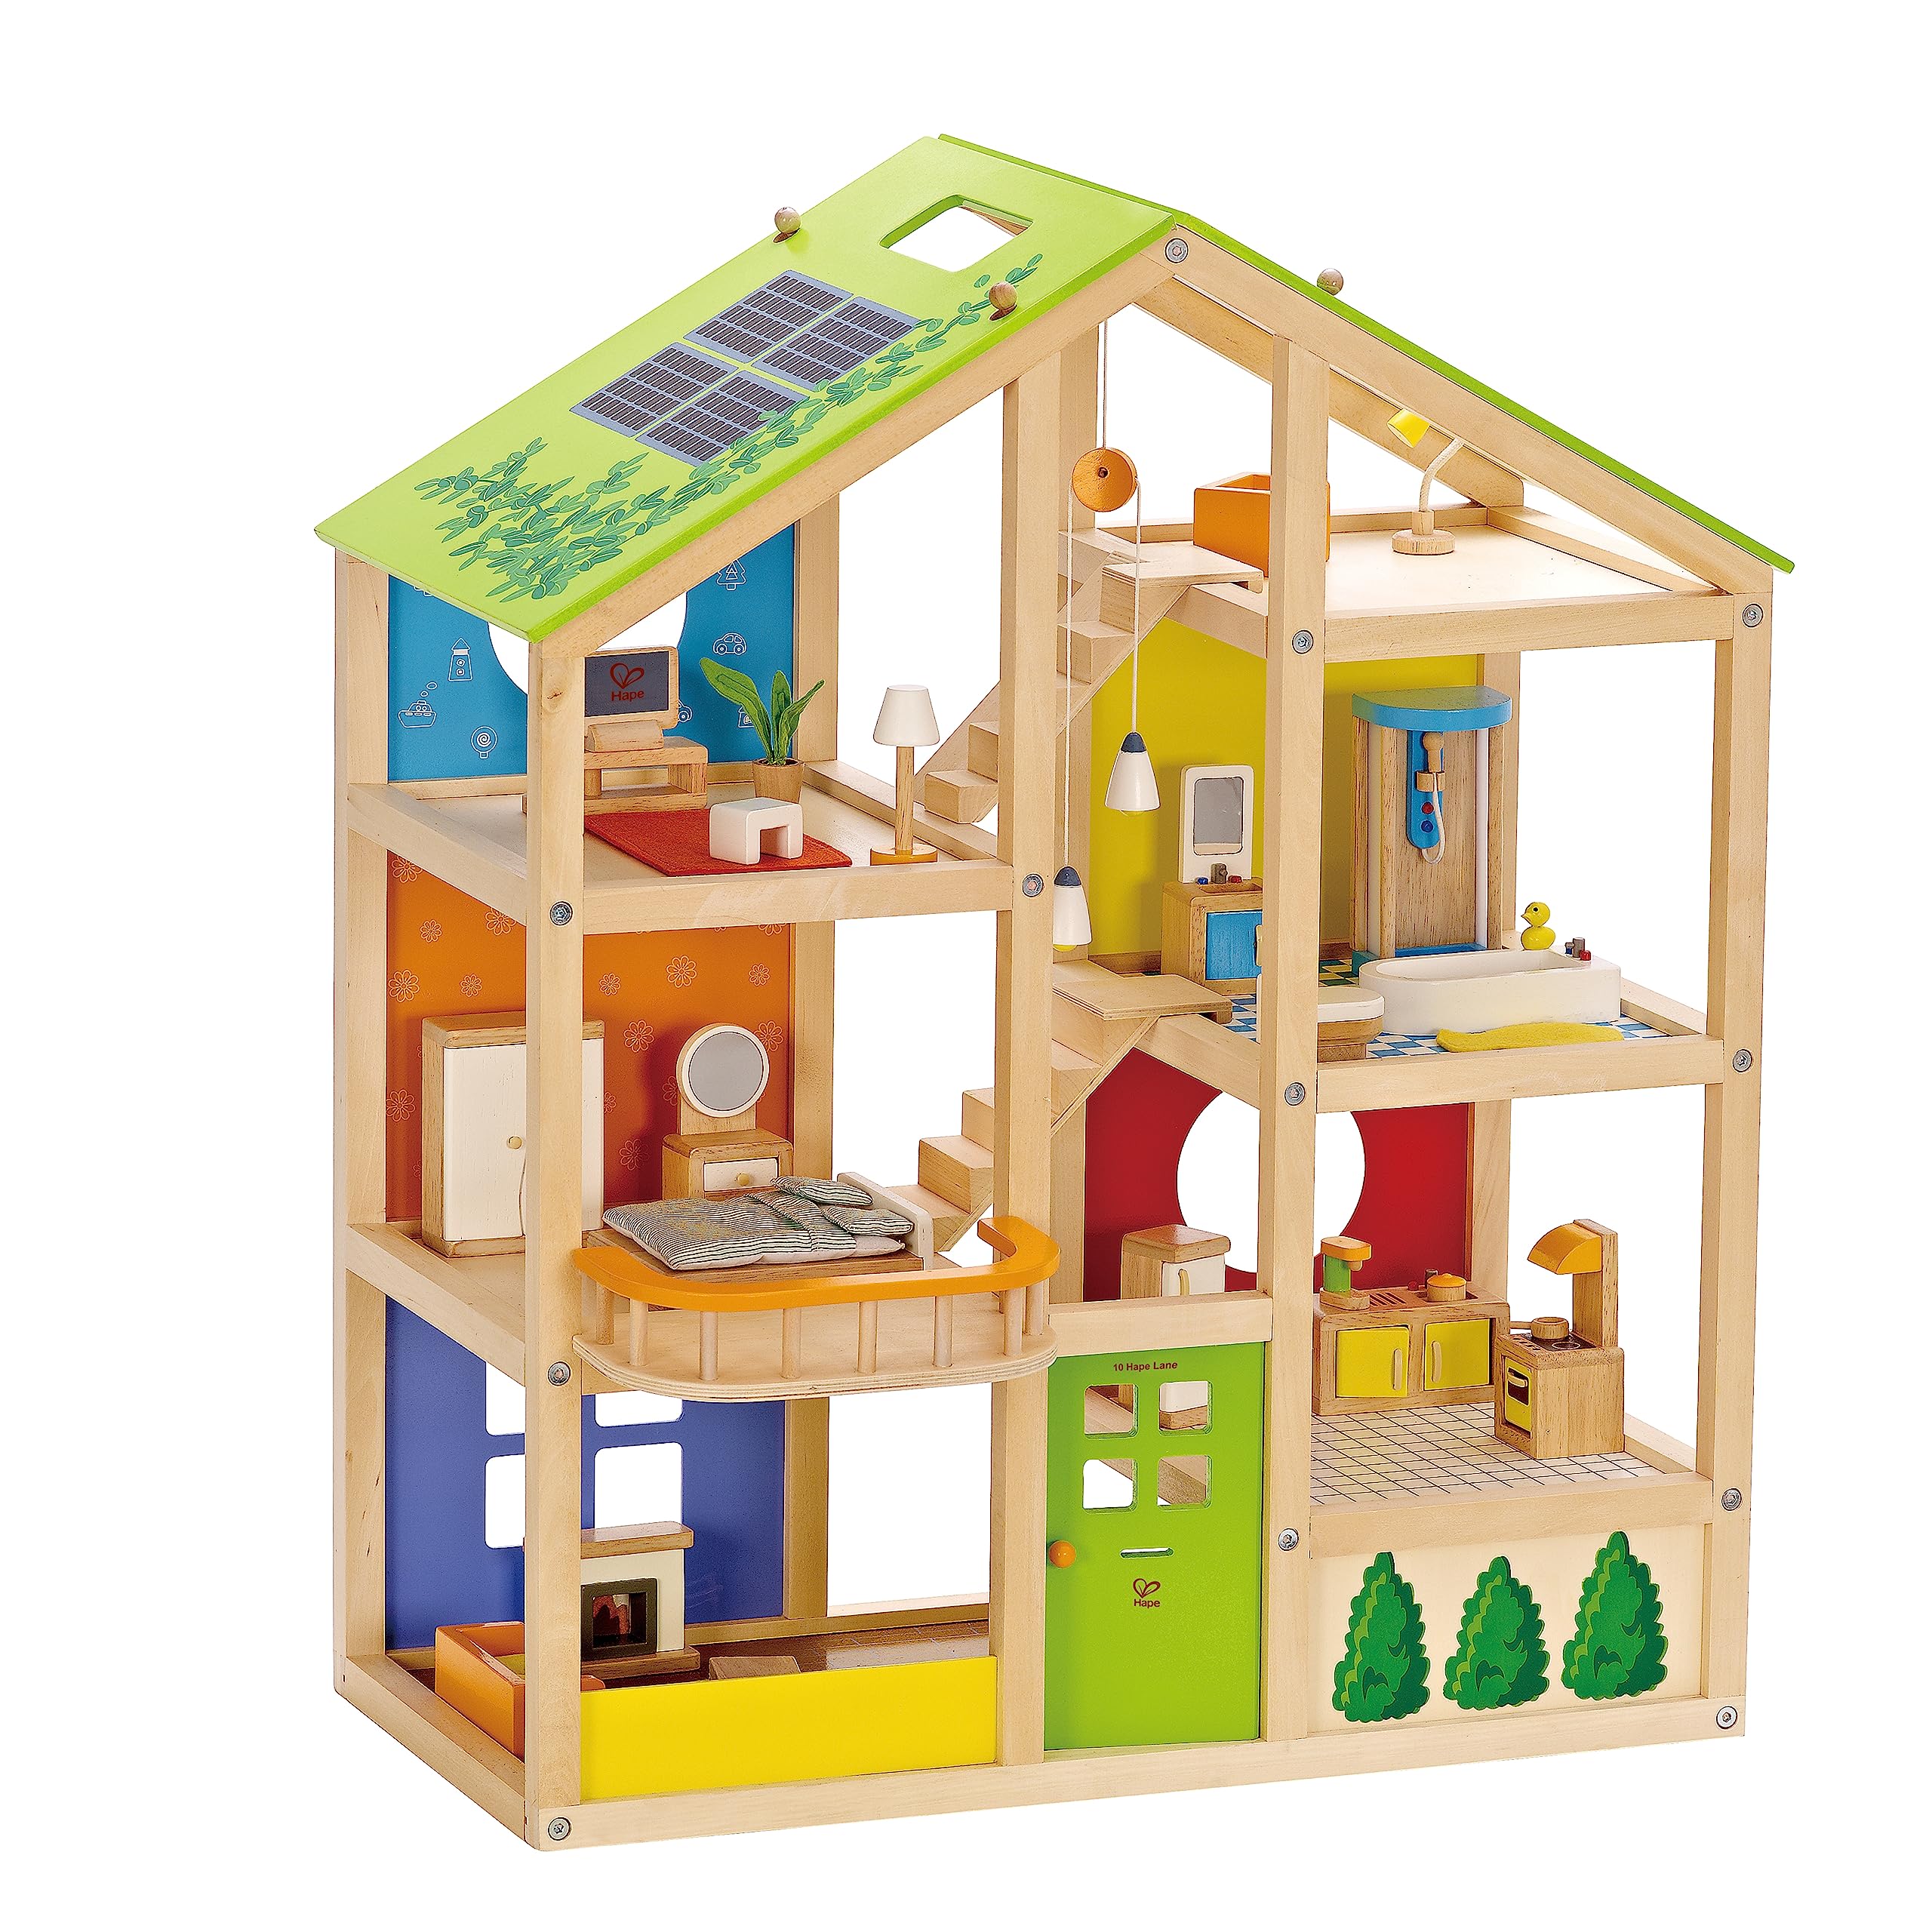 Hape Wooden All Season/4 Season 6 Tier Dollhouse Kids Play House for Children Ages 3 Years and Up, Multicolored